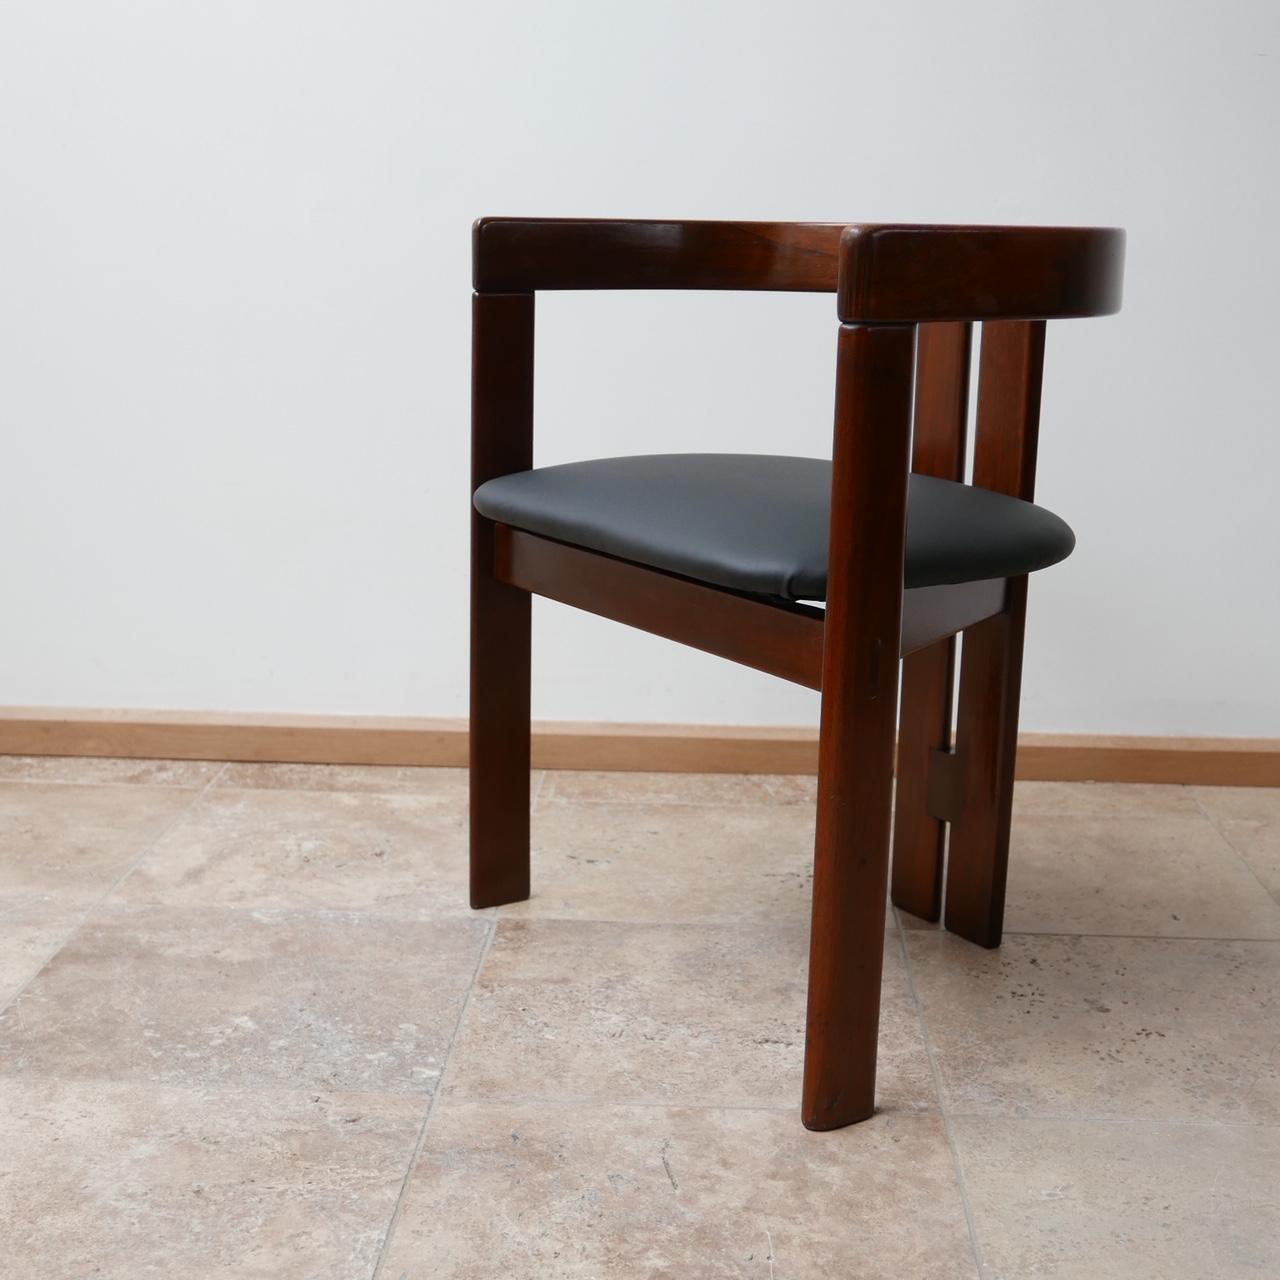 'Pigreco' Italian Midcentury Dining Chairs Attributed to Tobia Scarpa 2